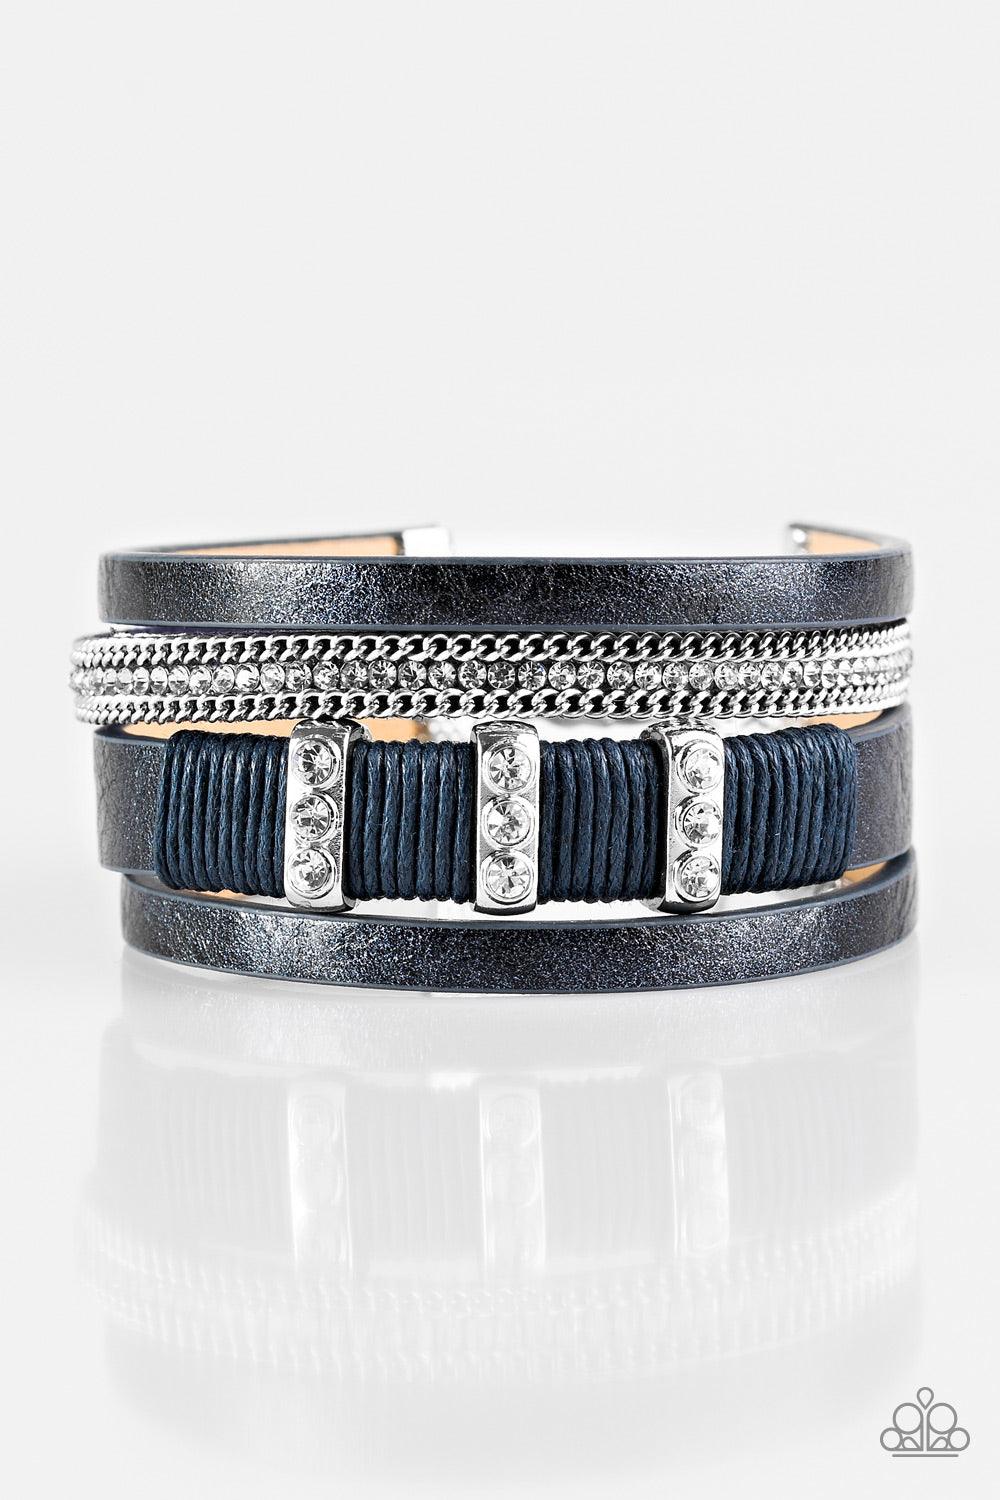 Paparazzi Accessories FAME Night - Blue Metallic blue leather strands layer across the wrist. Infused with silver chain and white rhinestone accents, blue cording knots around a leather strand, securing glittery white rhinestone frames in place for a sass